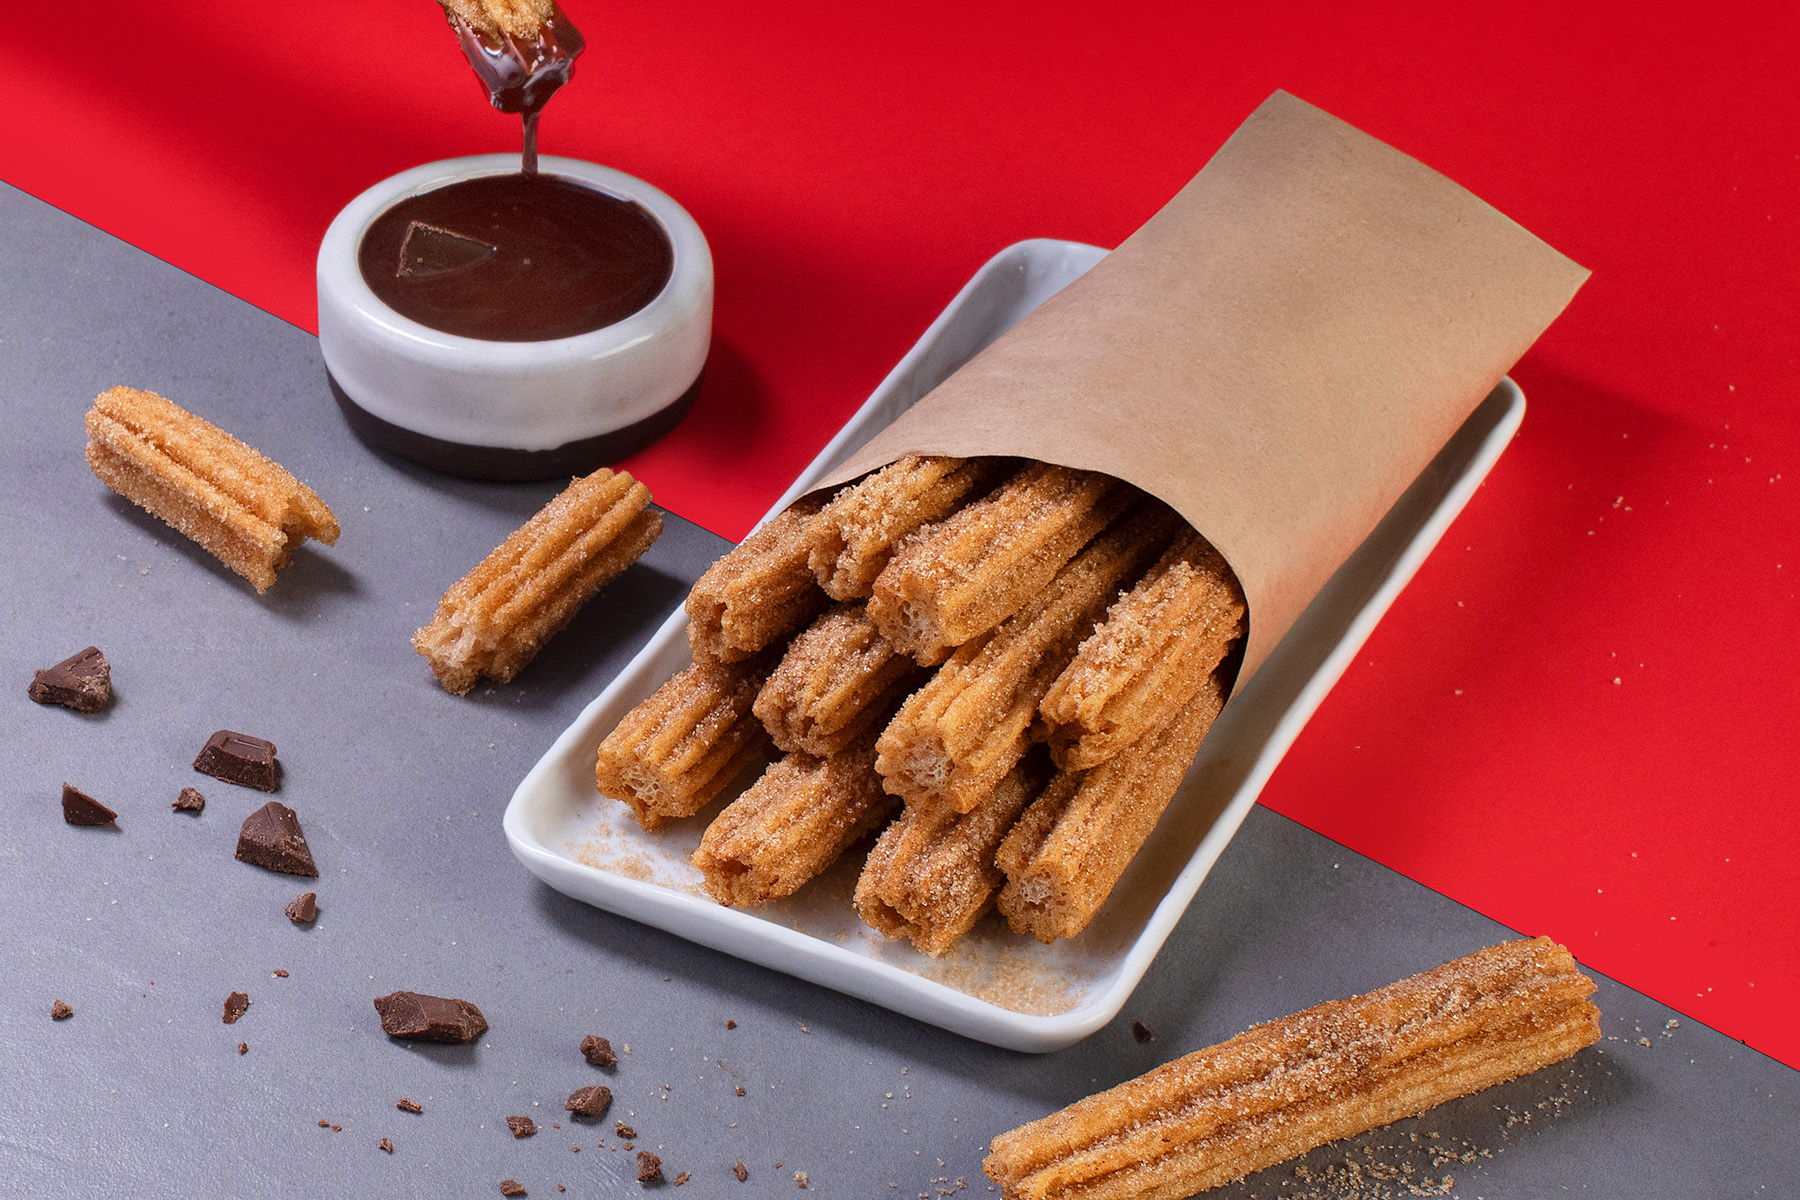 bag of churros with chocolate dipping sauce